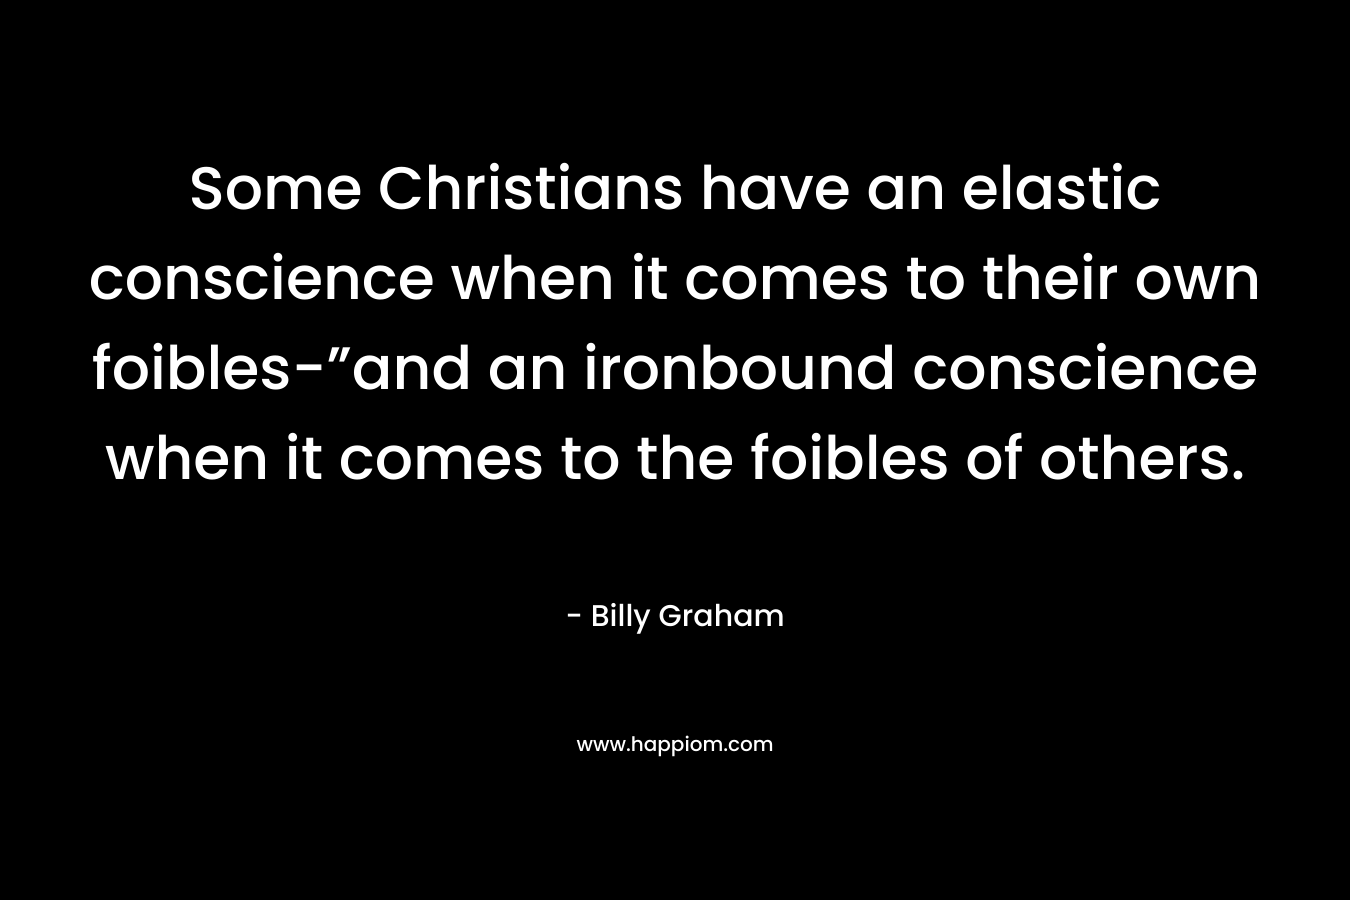 Some Christians have an elastic conscience when it comes to their own foibles-”and an ironbound conscience when it comes to the foibles of others. – Billy Graham